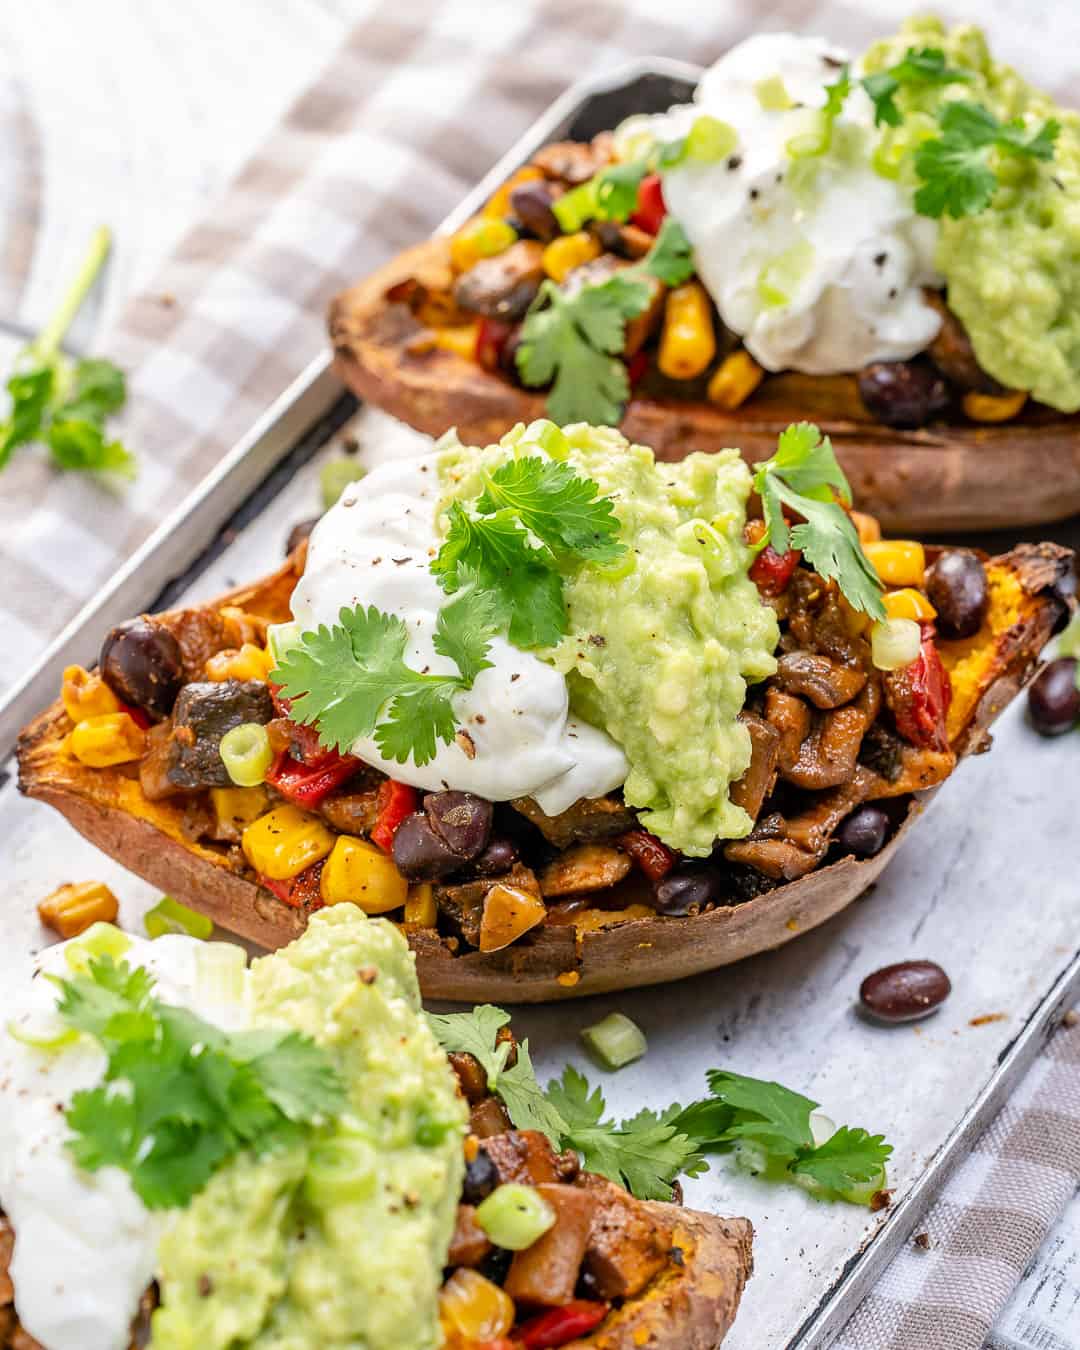 baked sweet potato recipe stuffed with taco mixture and topped with avocado, yogurt, and cilantro 